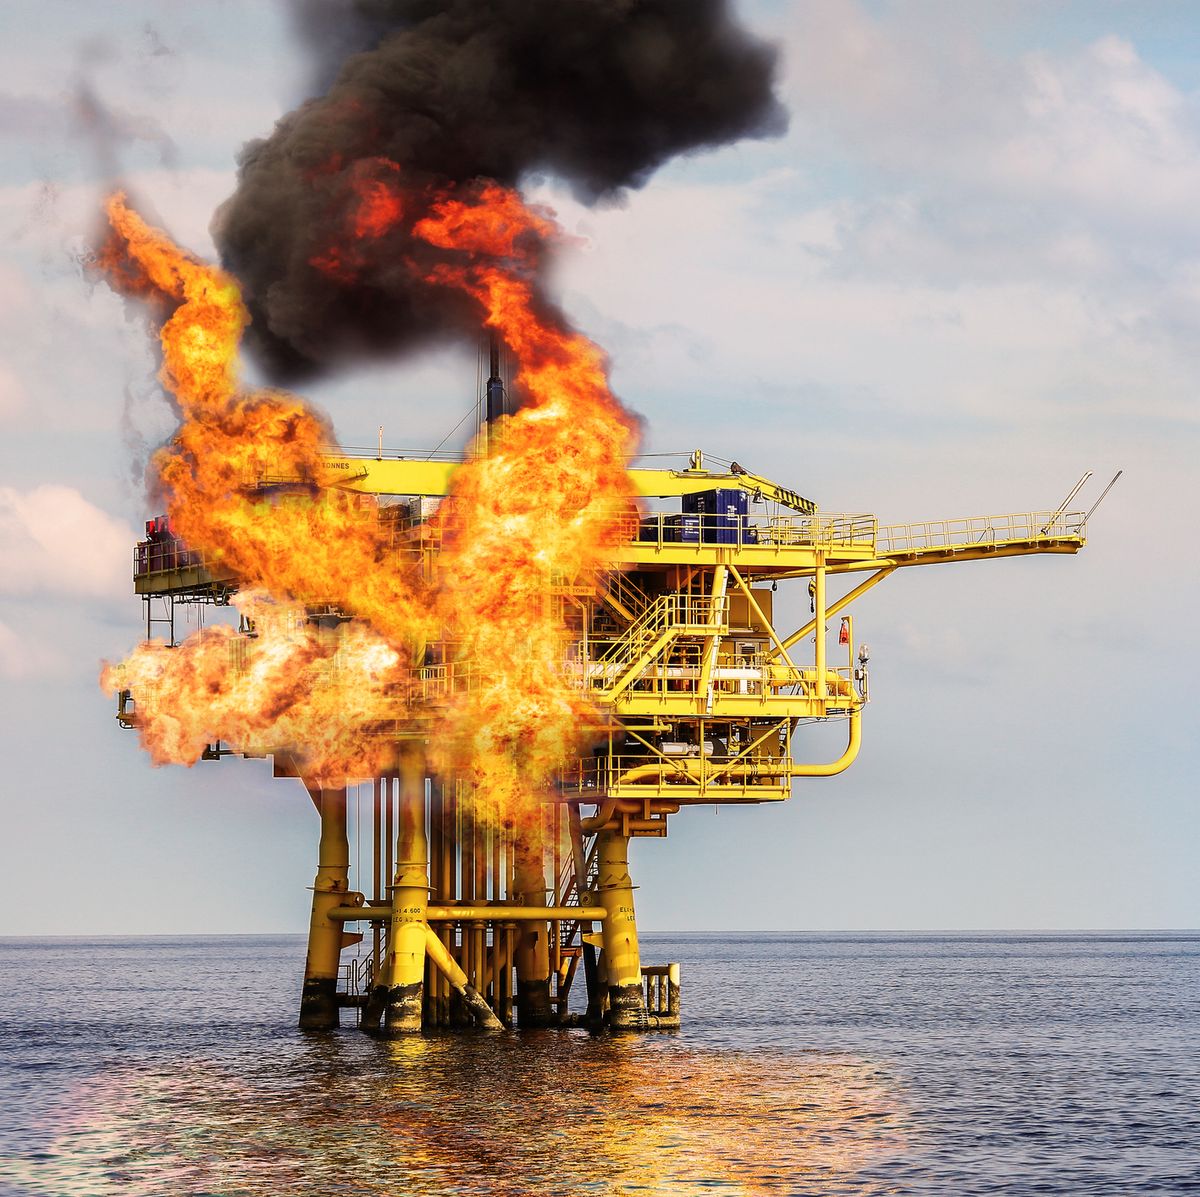 Oil rig, Explosion, Vehicle, Offshore drilling, Gas flare, Petroleum, Semi-submersible, Heat, Pollution, Jackup rig, 